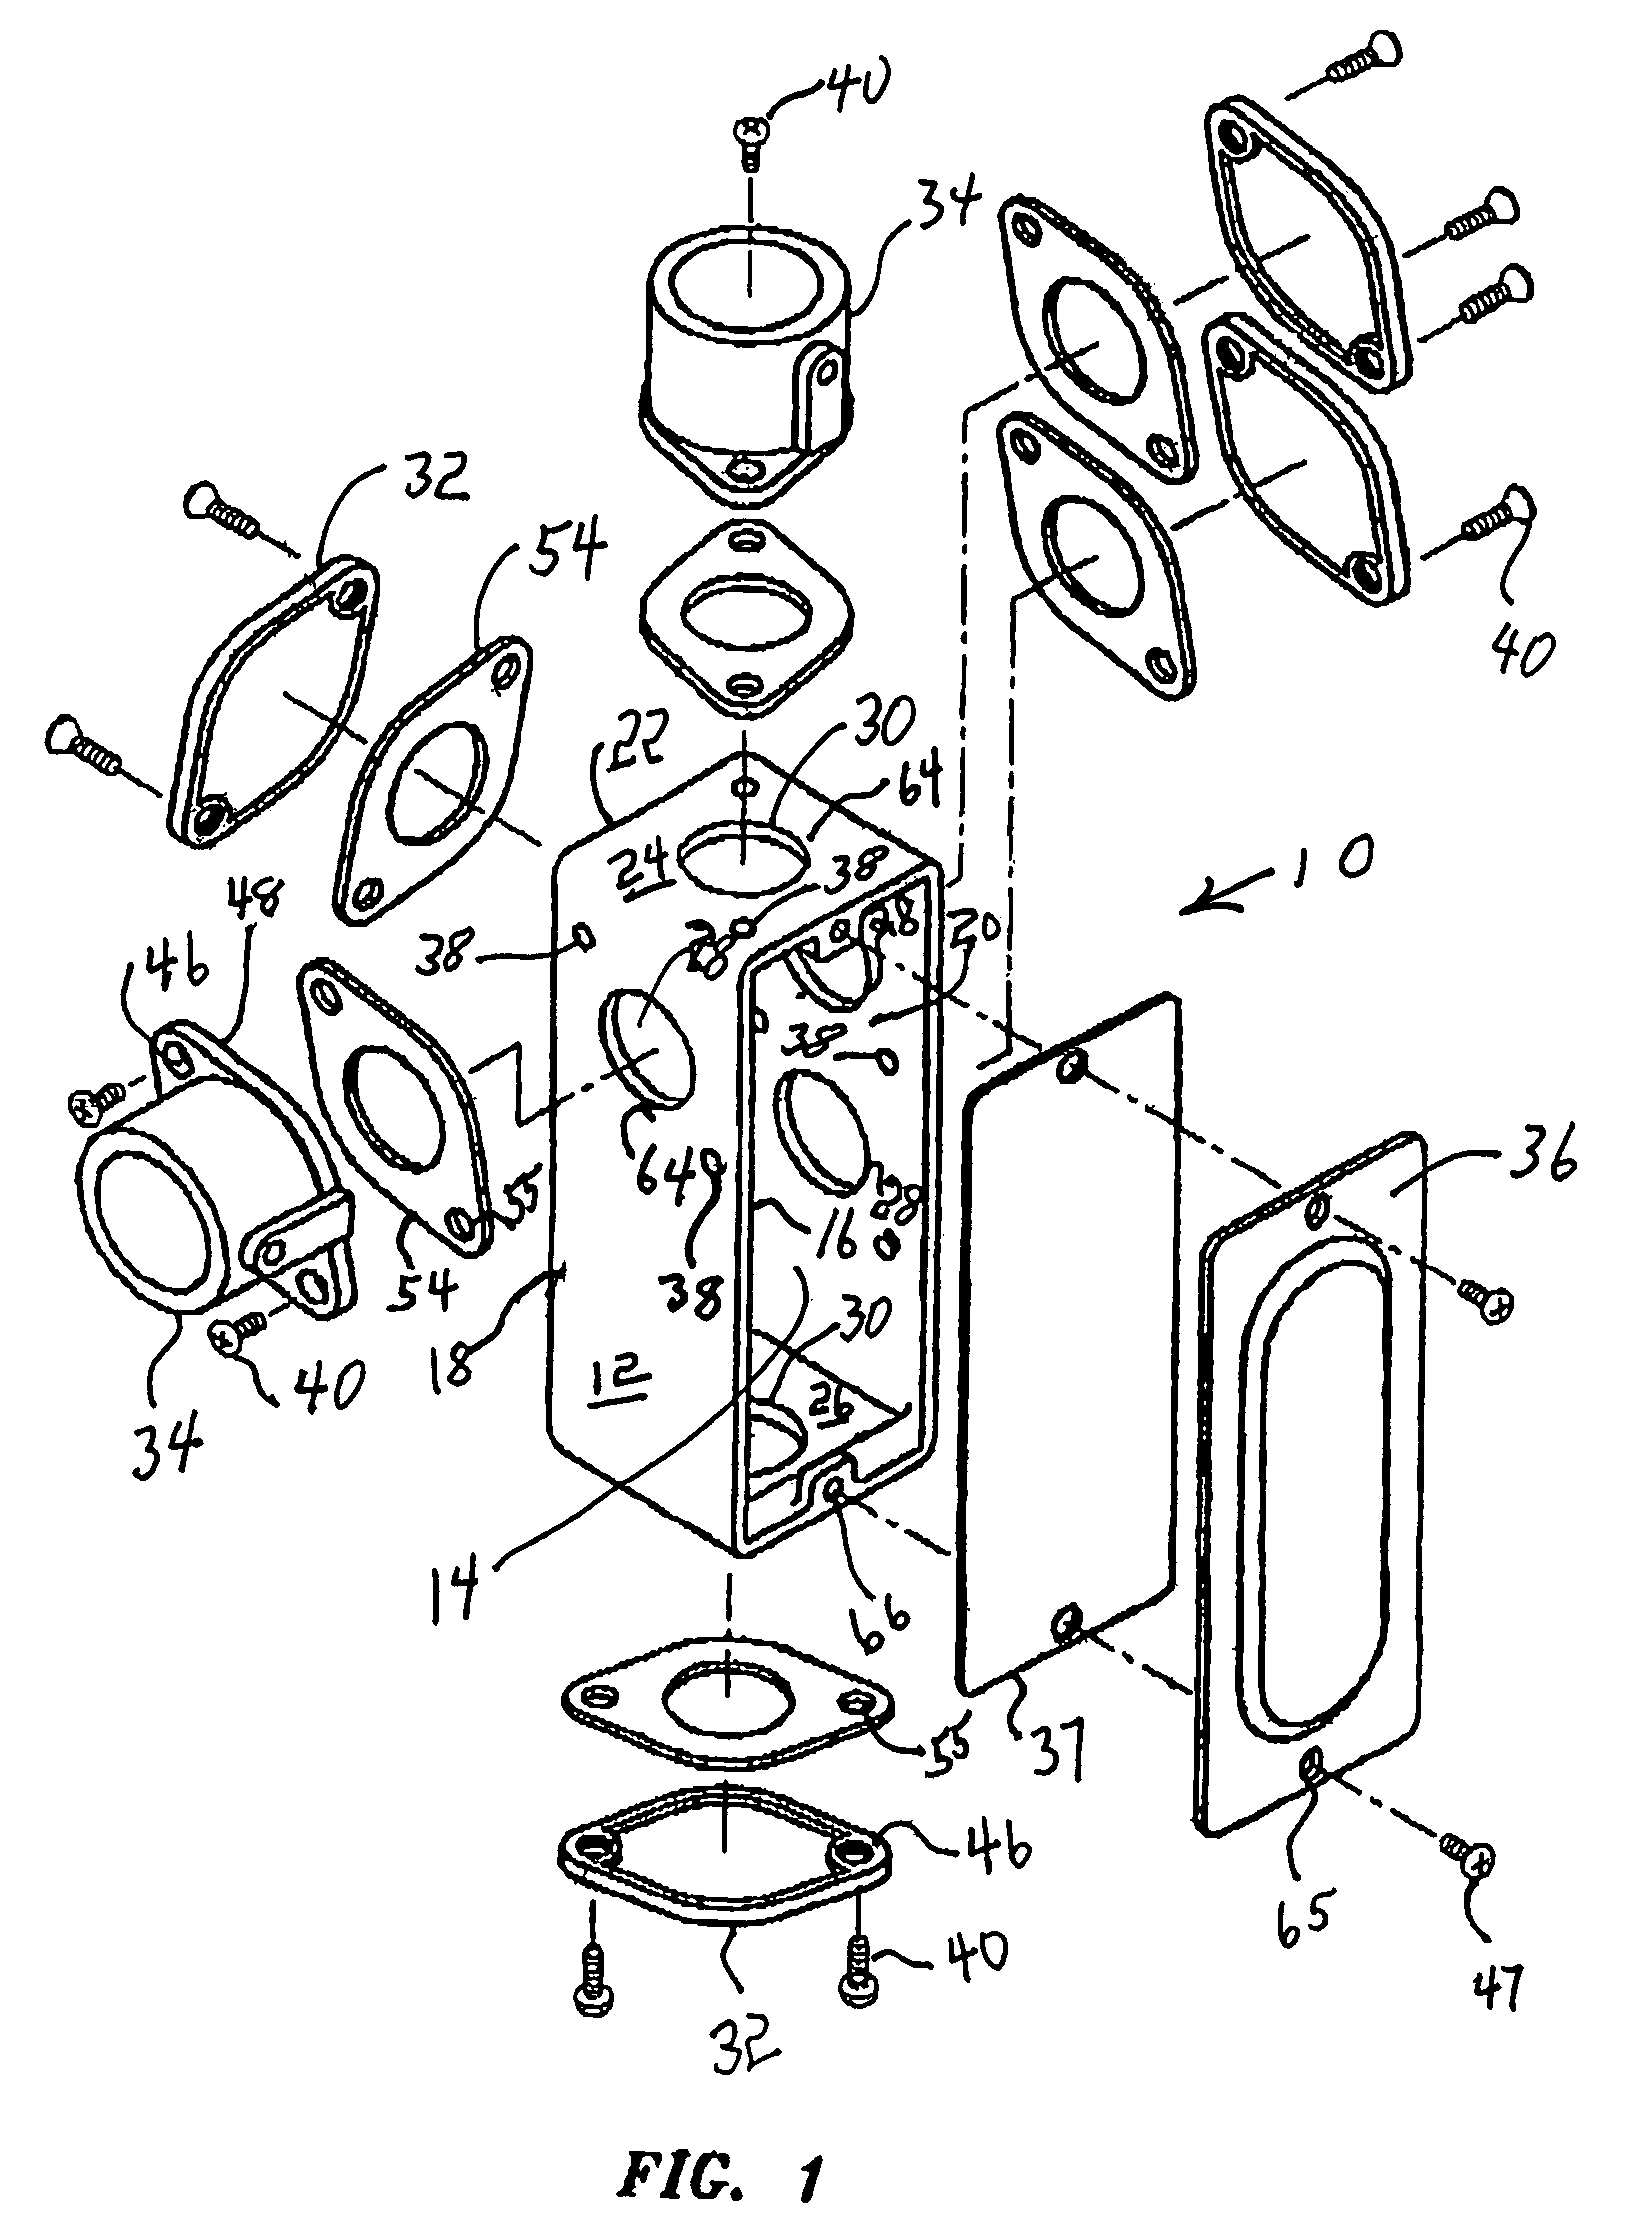 Electrical grounding and sealing of multi-position rain-tight junction box